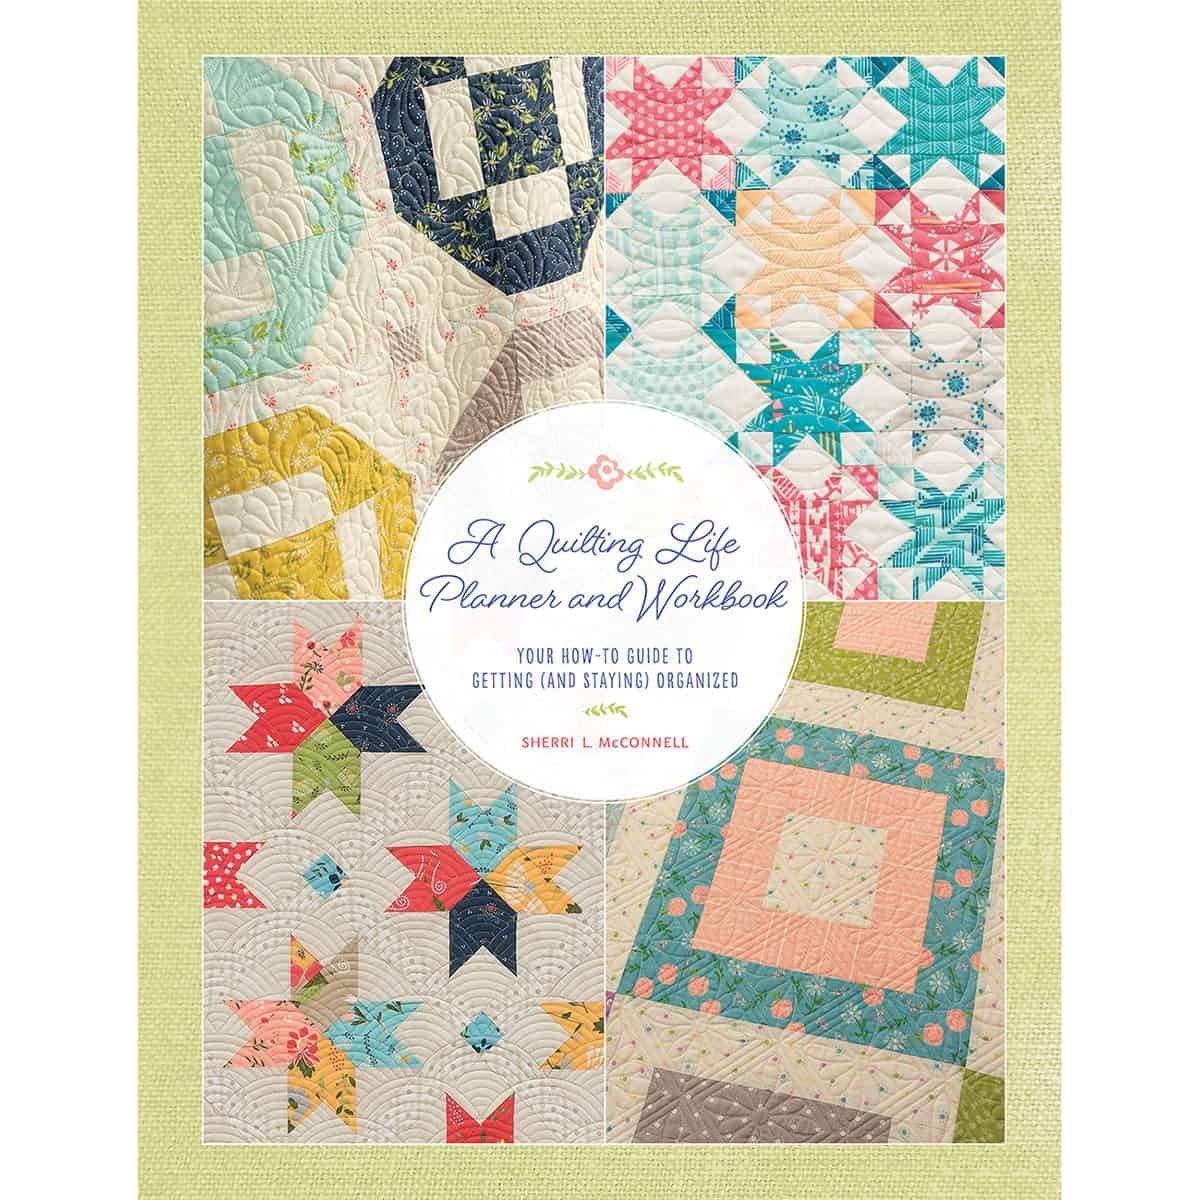 Quilting Life Planner & Workbook December 2022 featured by Top US Quilt Blog, A Quilting Life